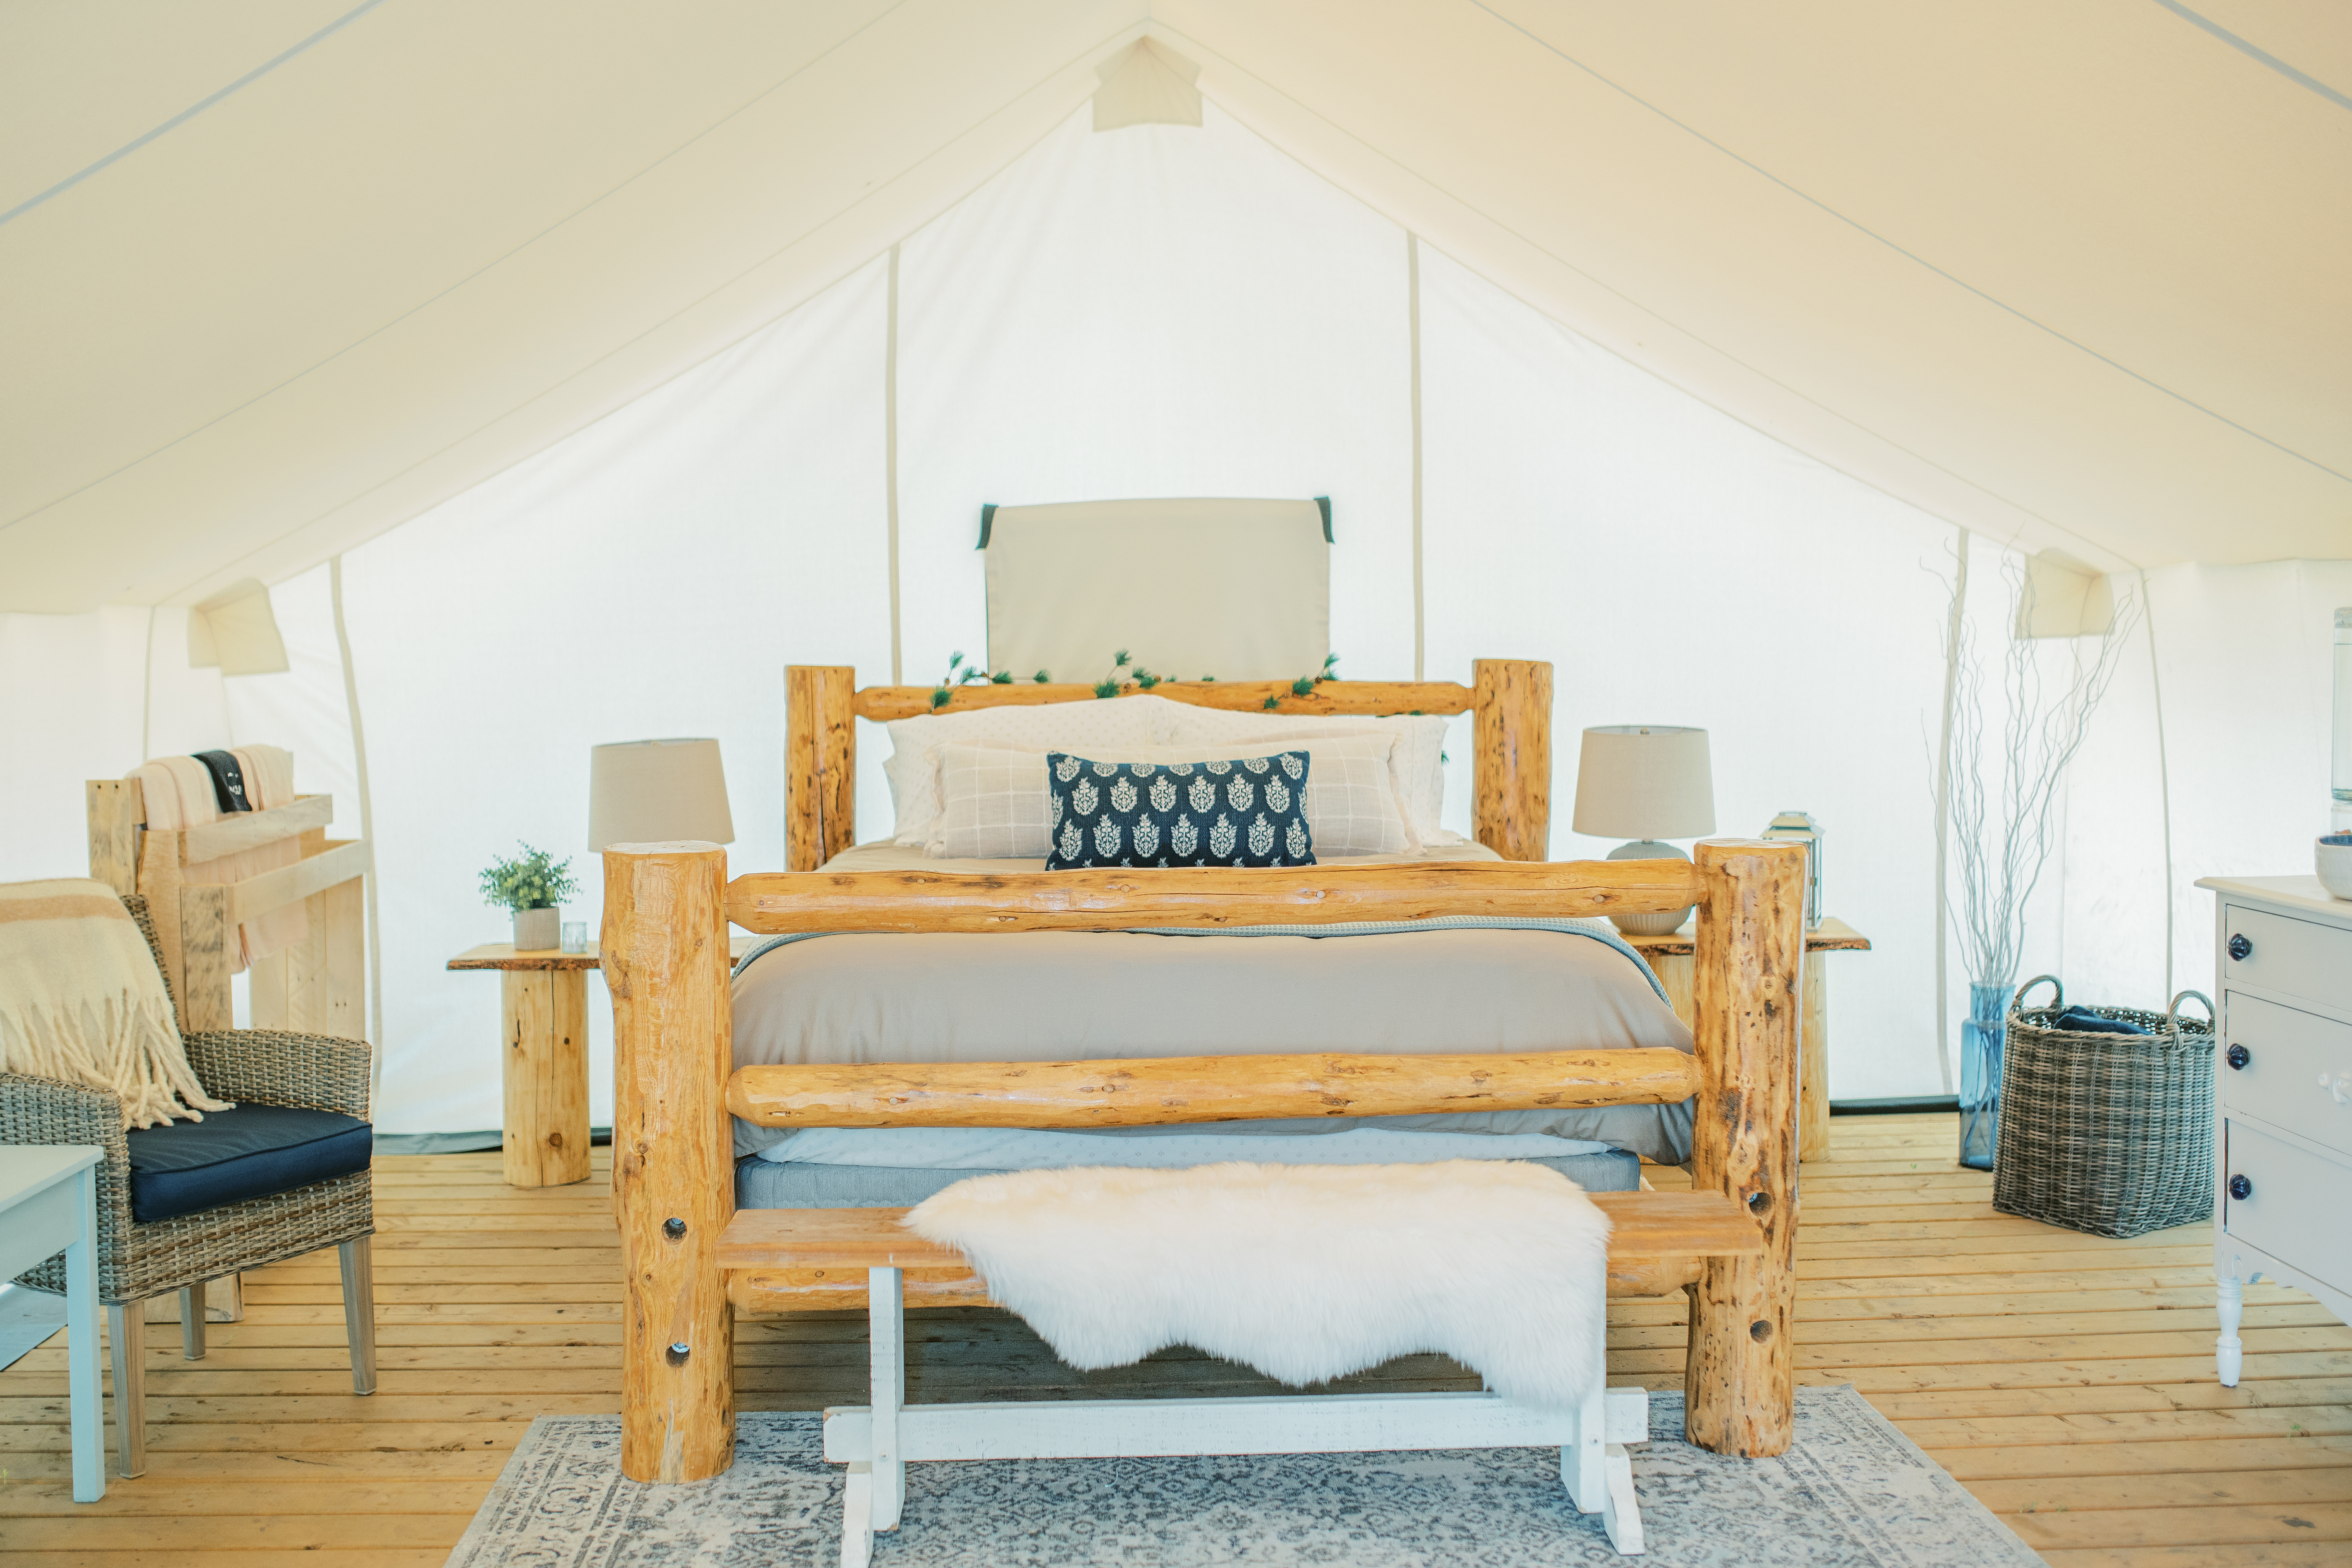 Bright and airy wall tent with kitchenette, woodstove and a beautiful atmosphere!